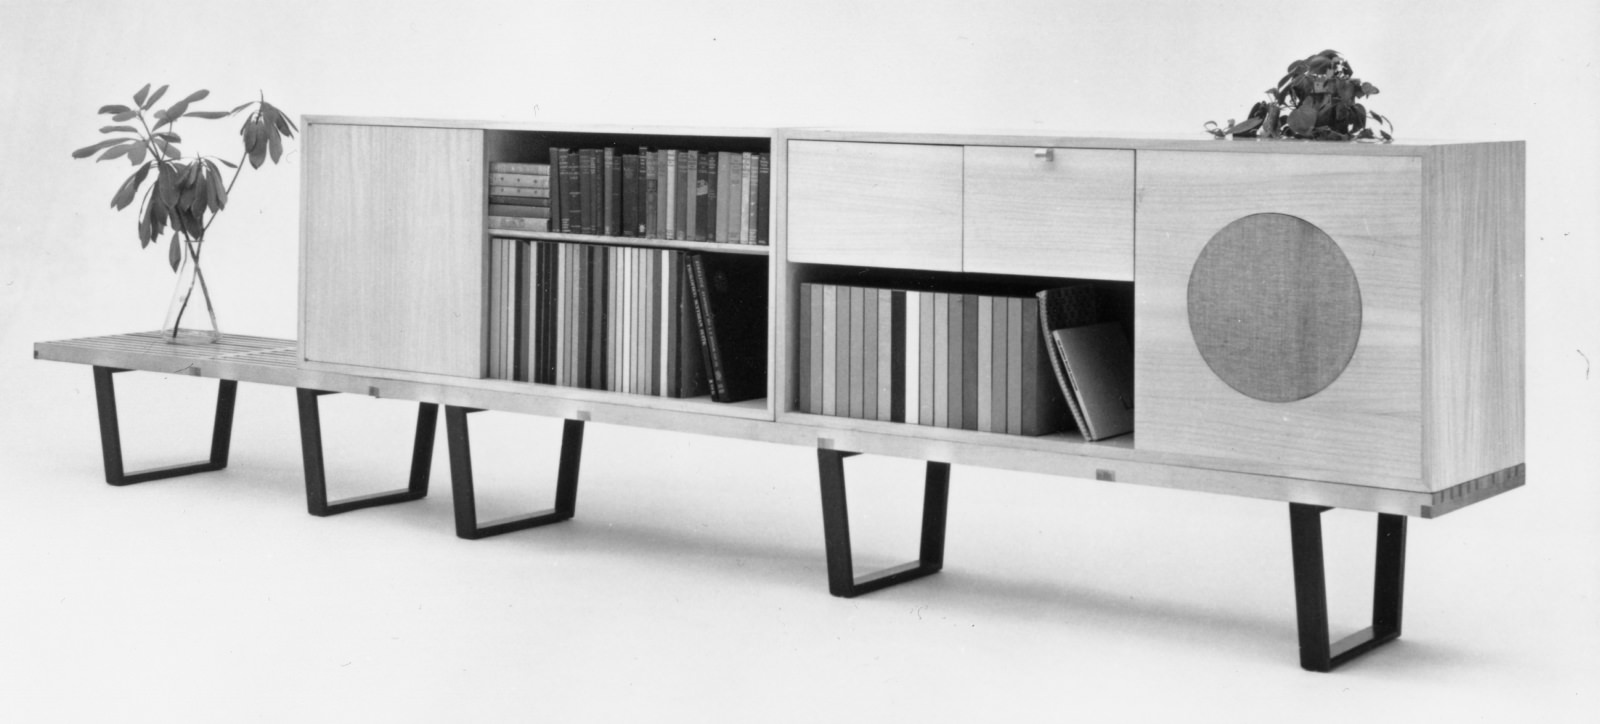 Two side-by-side Nelson platform benches supporting two bookcases, one featuring a radio phono speaker cabinet.